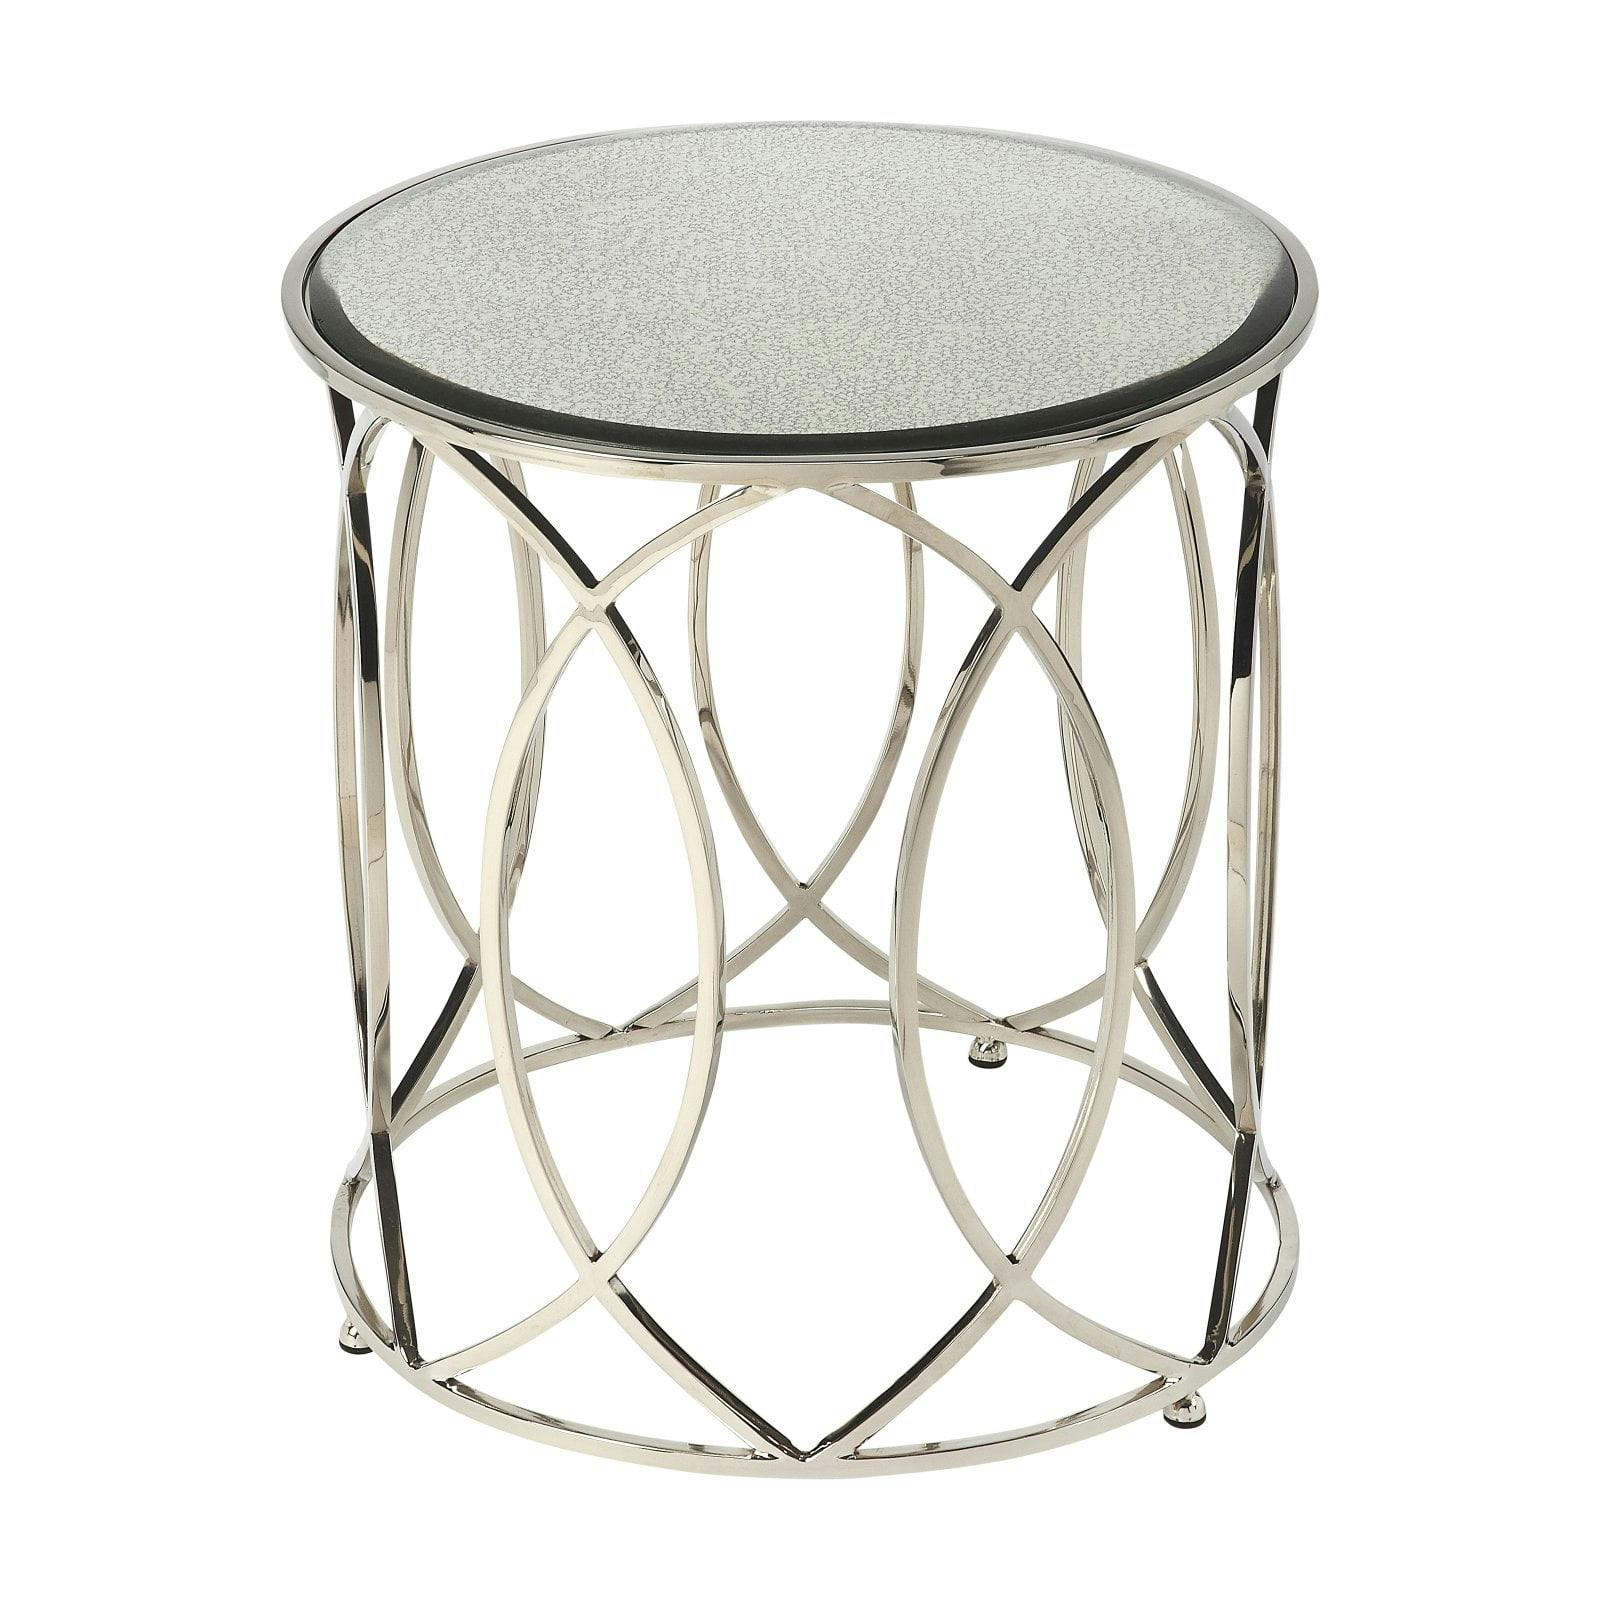 Interlaced Oval Rings Round Mirrored End Table in Polished Nickel